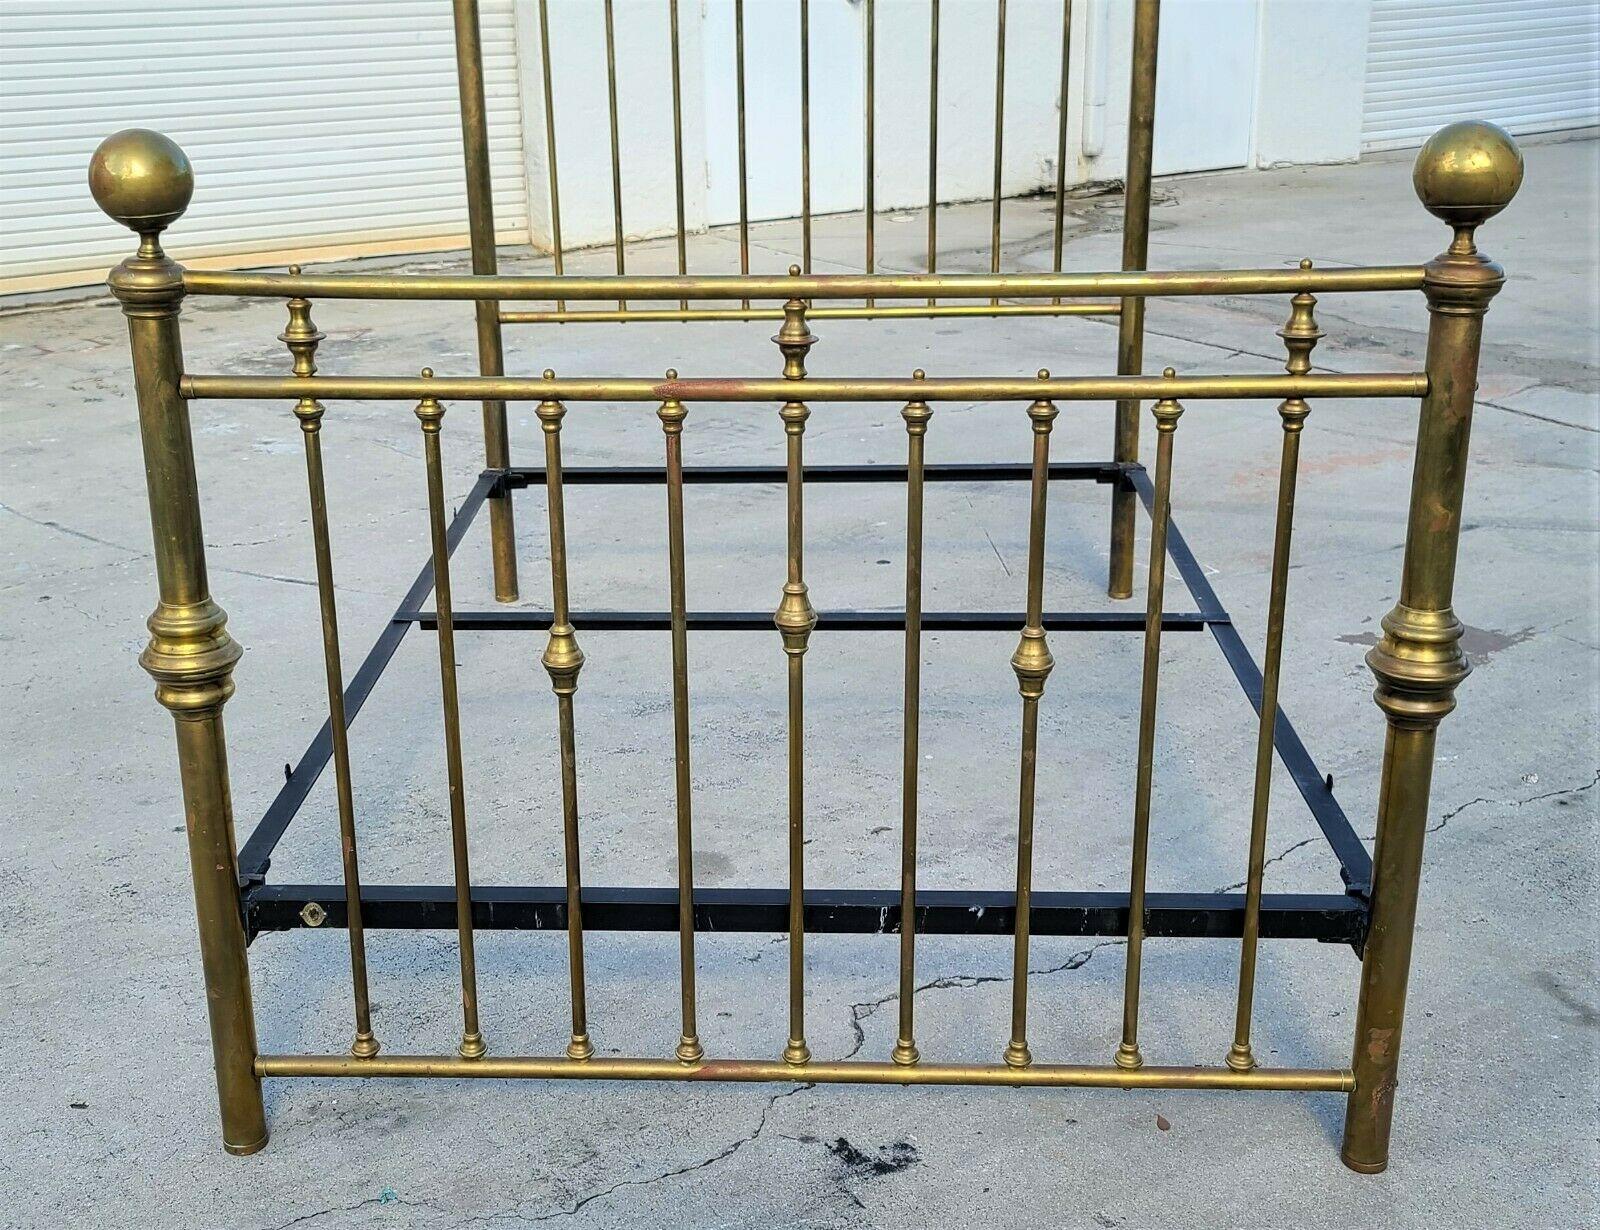 Offering one of our Recent Palm Beach estate fine furniture acquisitions of a
Heirloom Quality Full Size Brass Bed Frame by Brass Beds of Virginia
Featuring a solid iron 